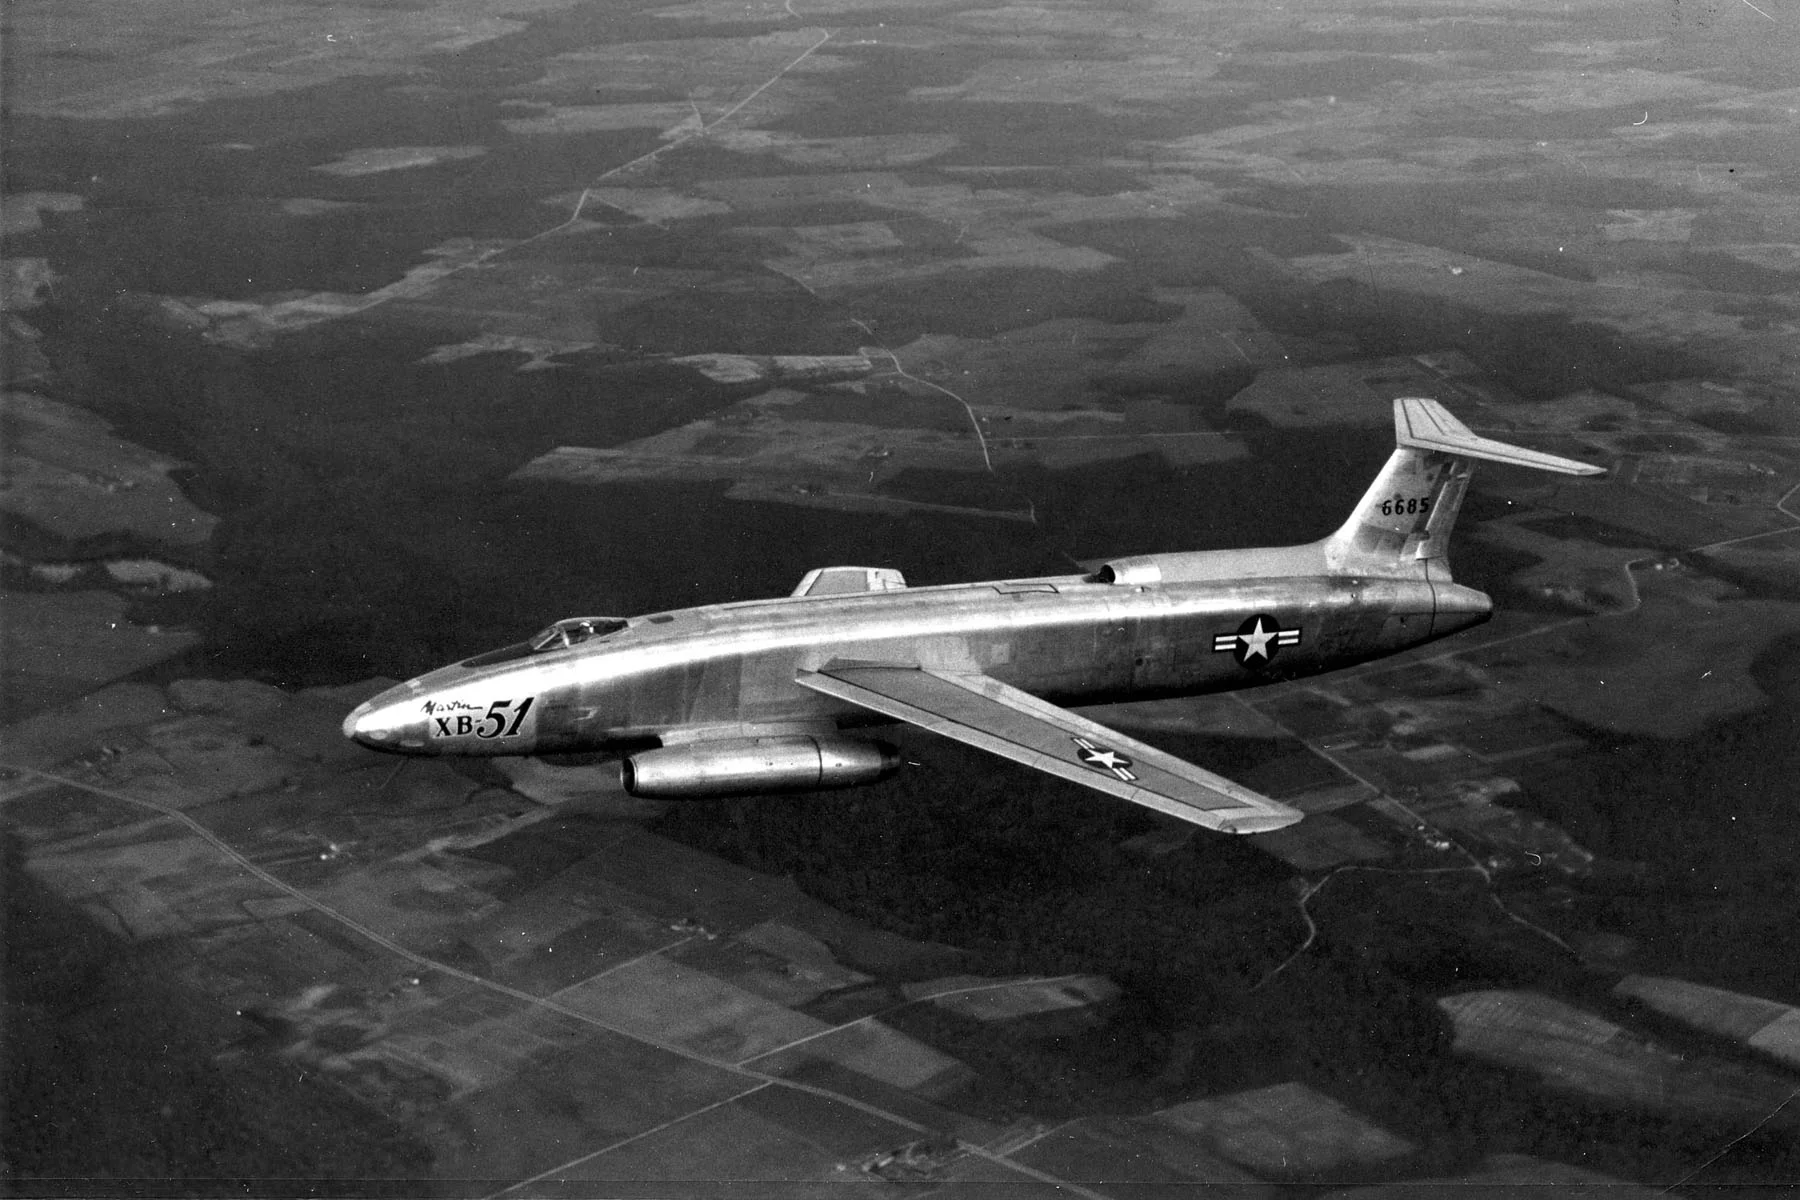 Martin put a lot of learnings from the XB-51 into the Seamaster.